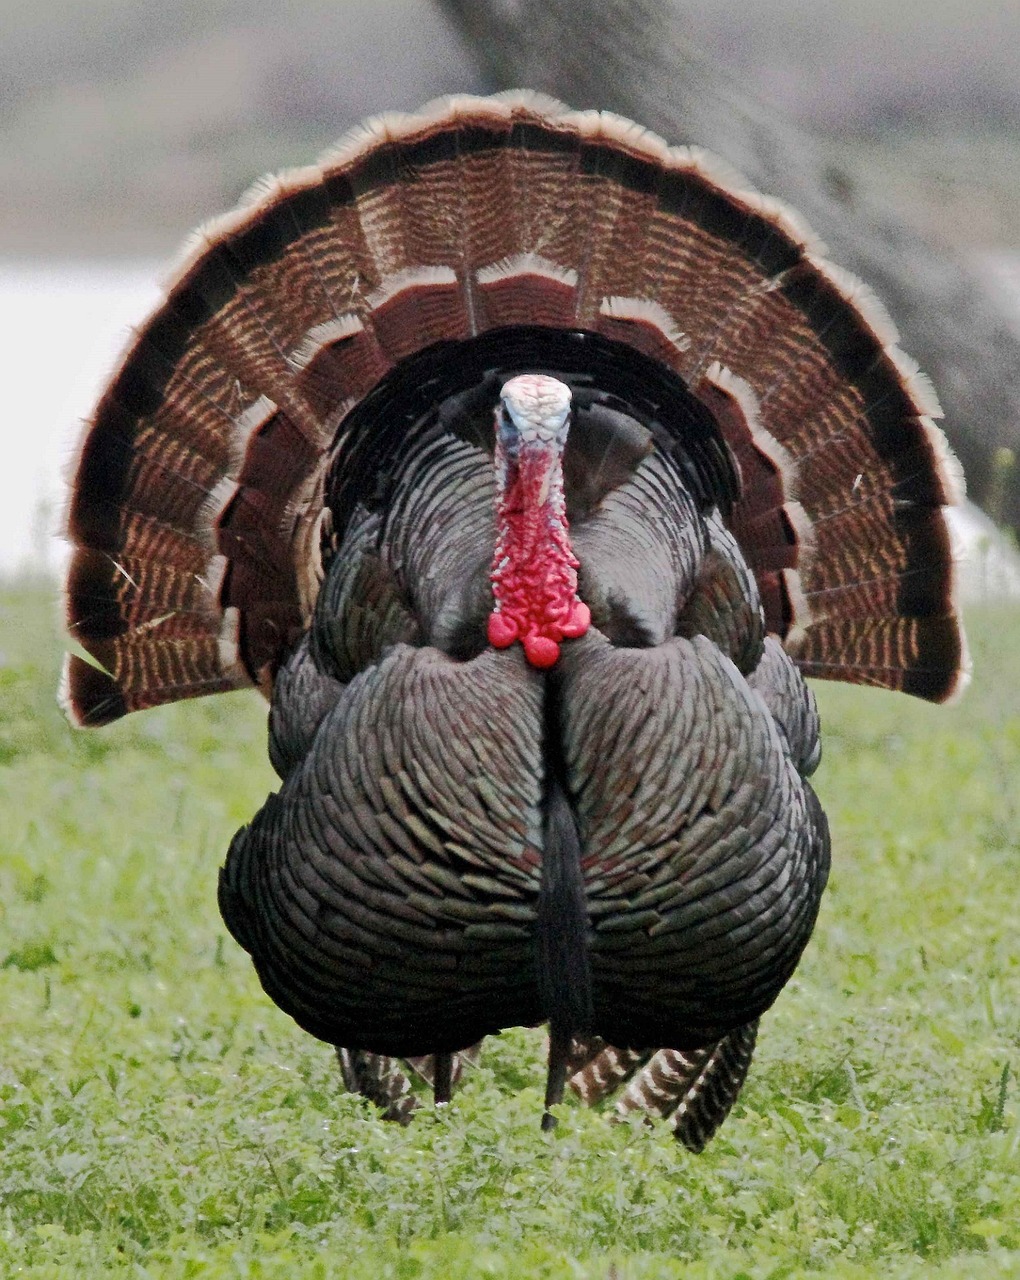 A wild turkey with feathers displayed